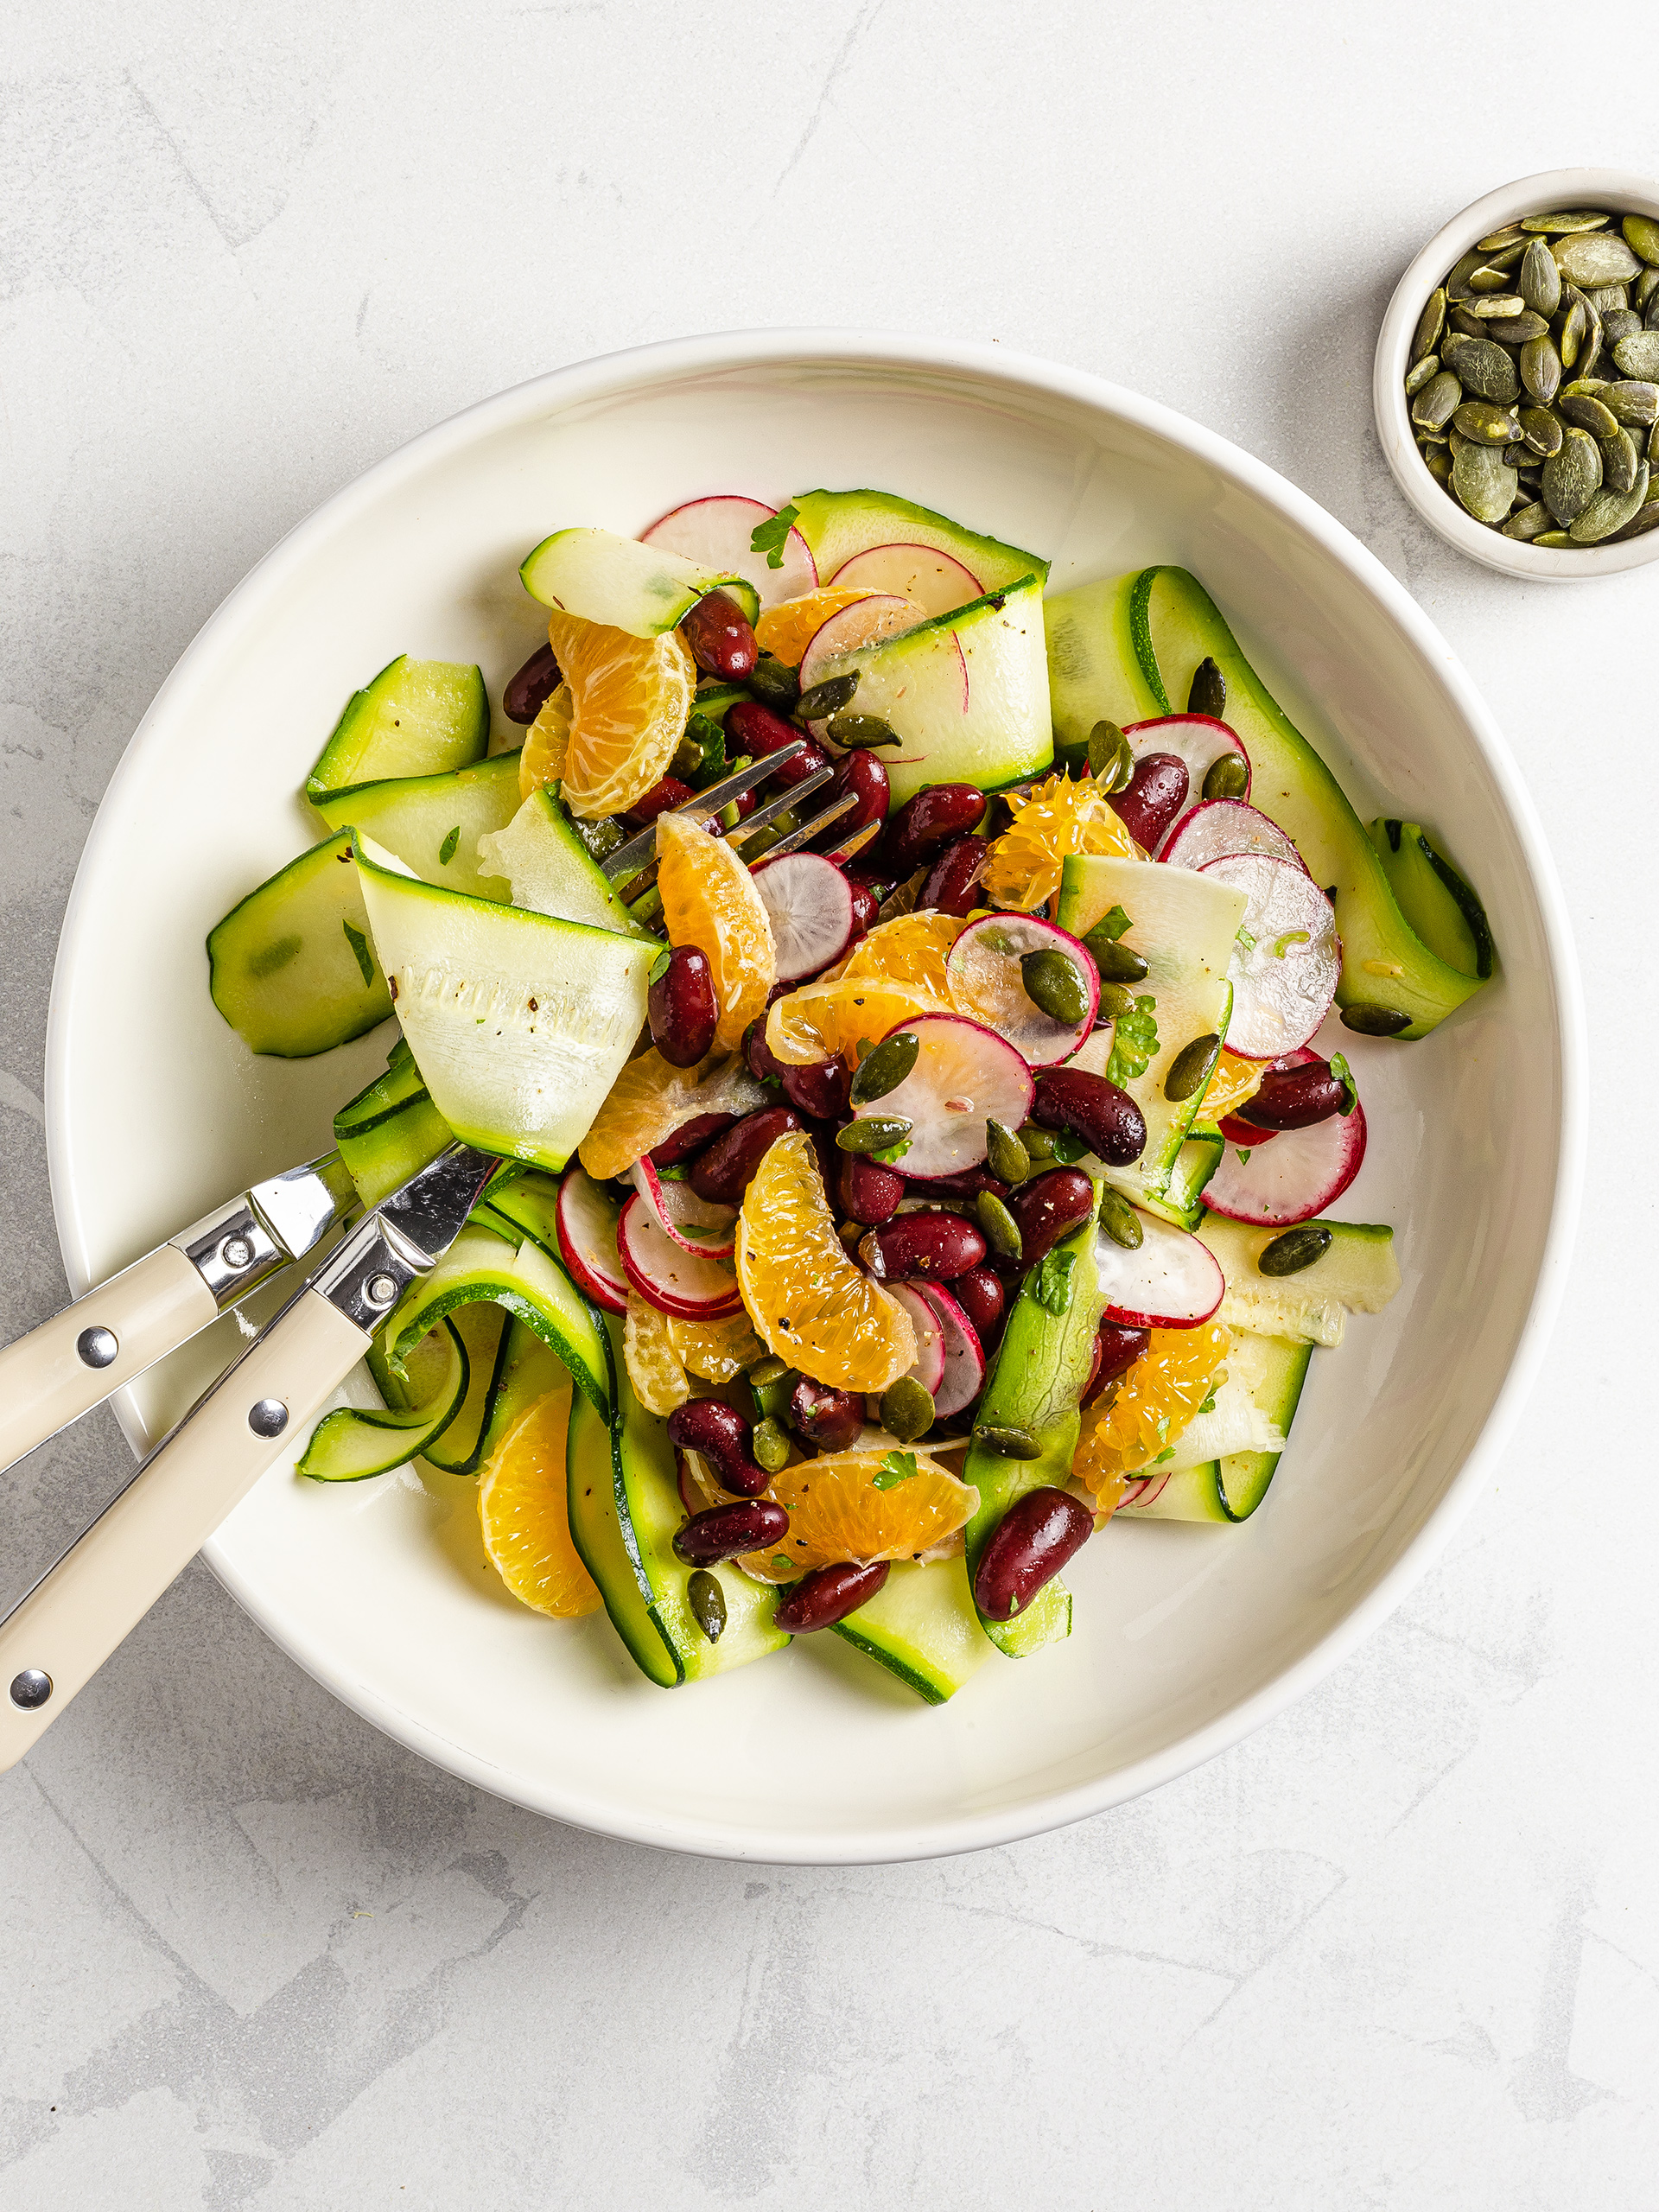 Zucchini ribbon salad with beans